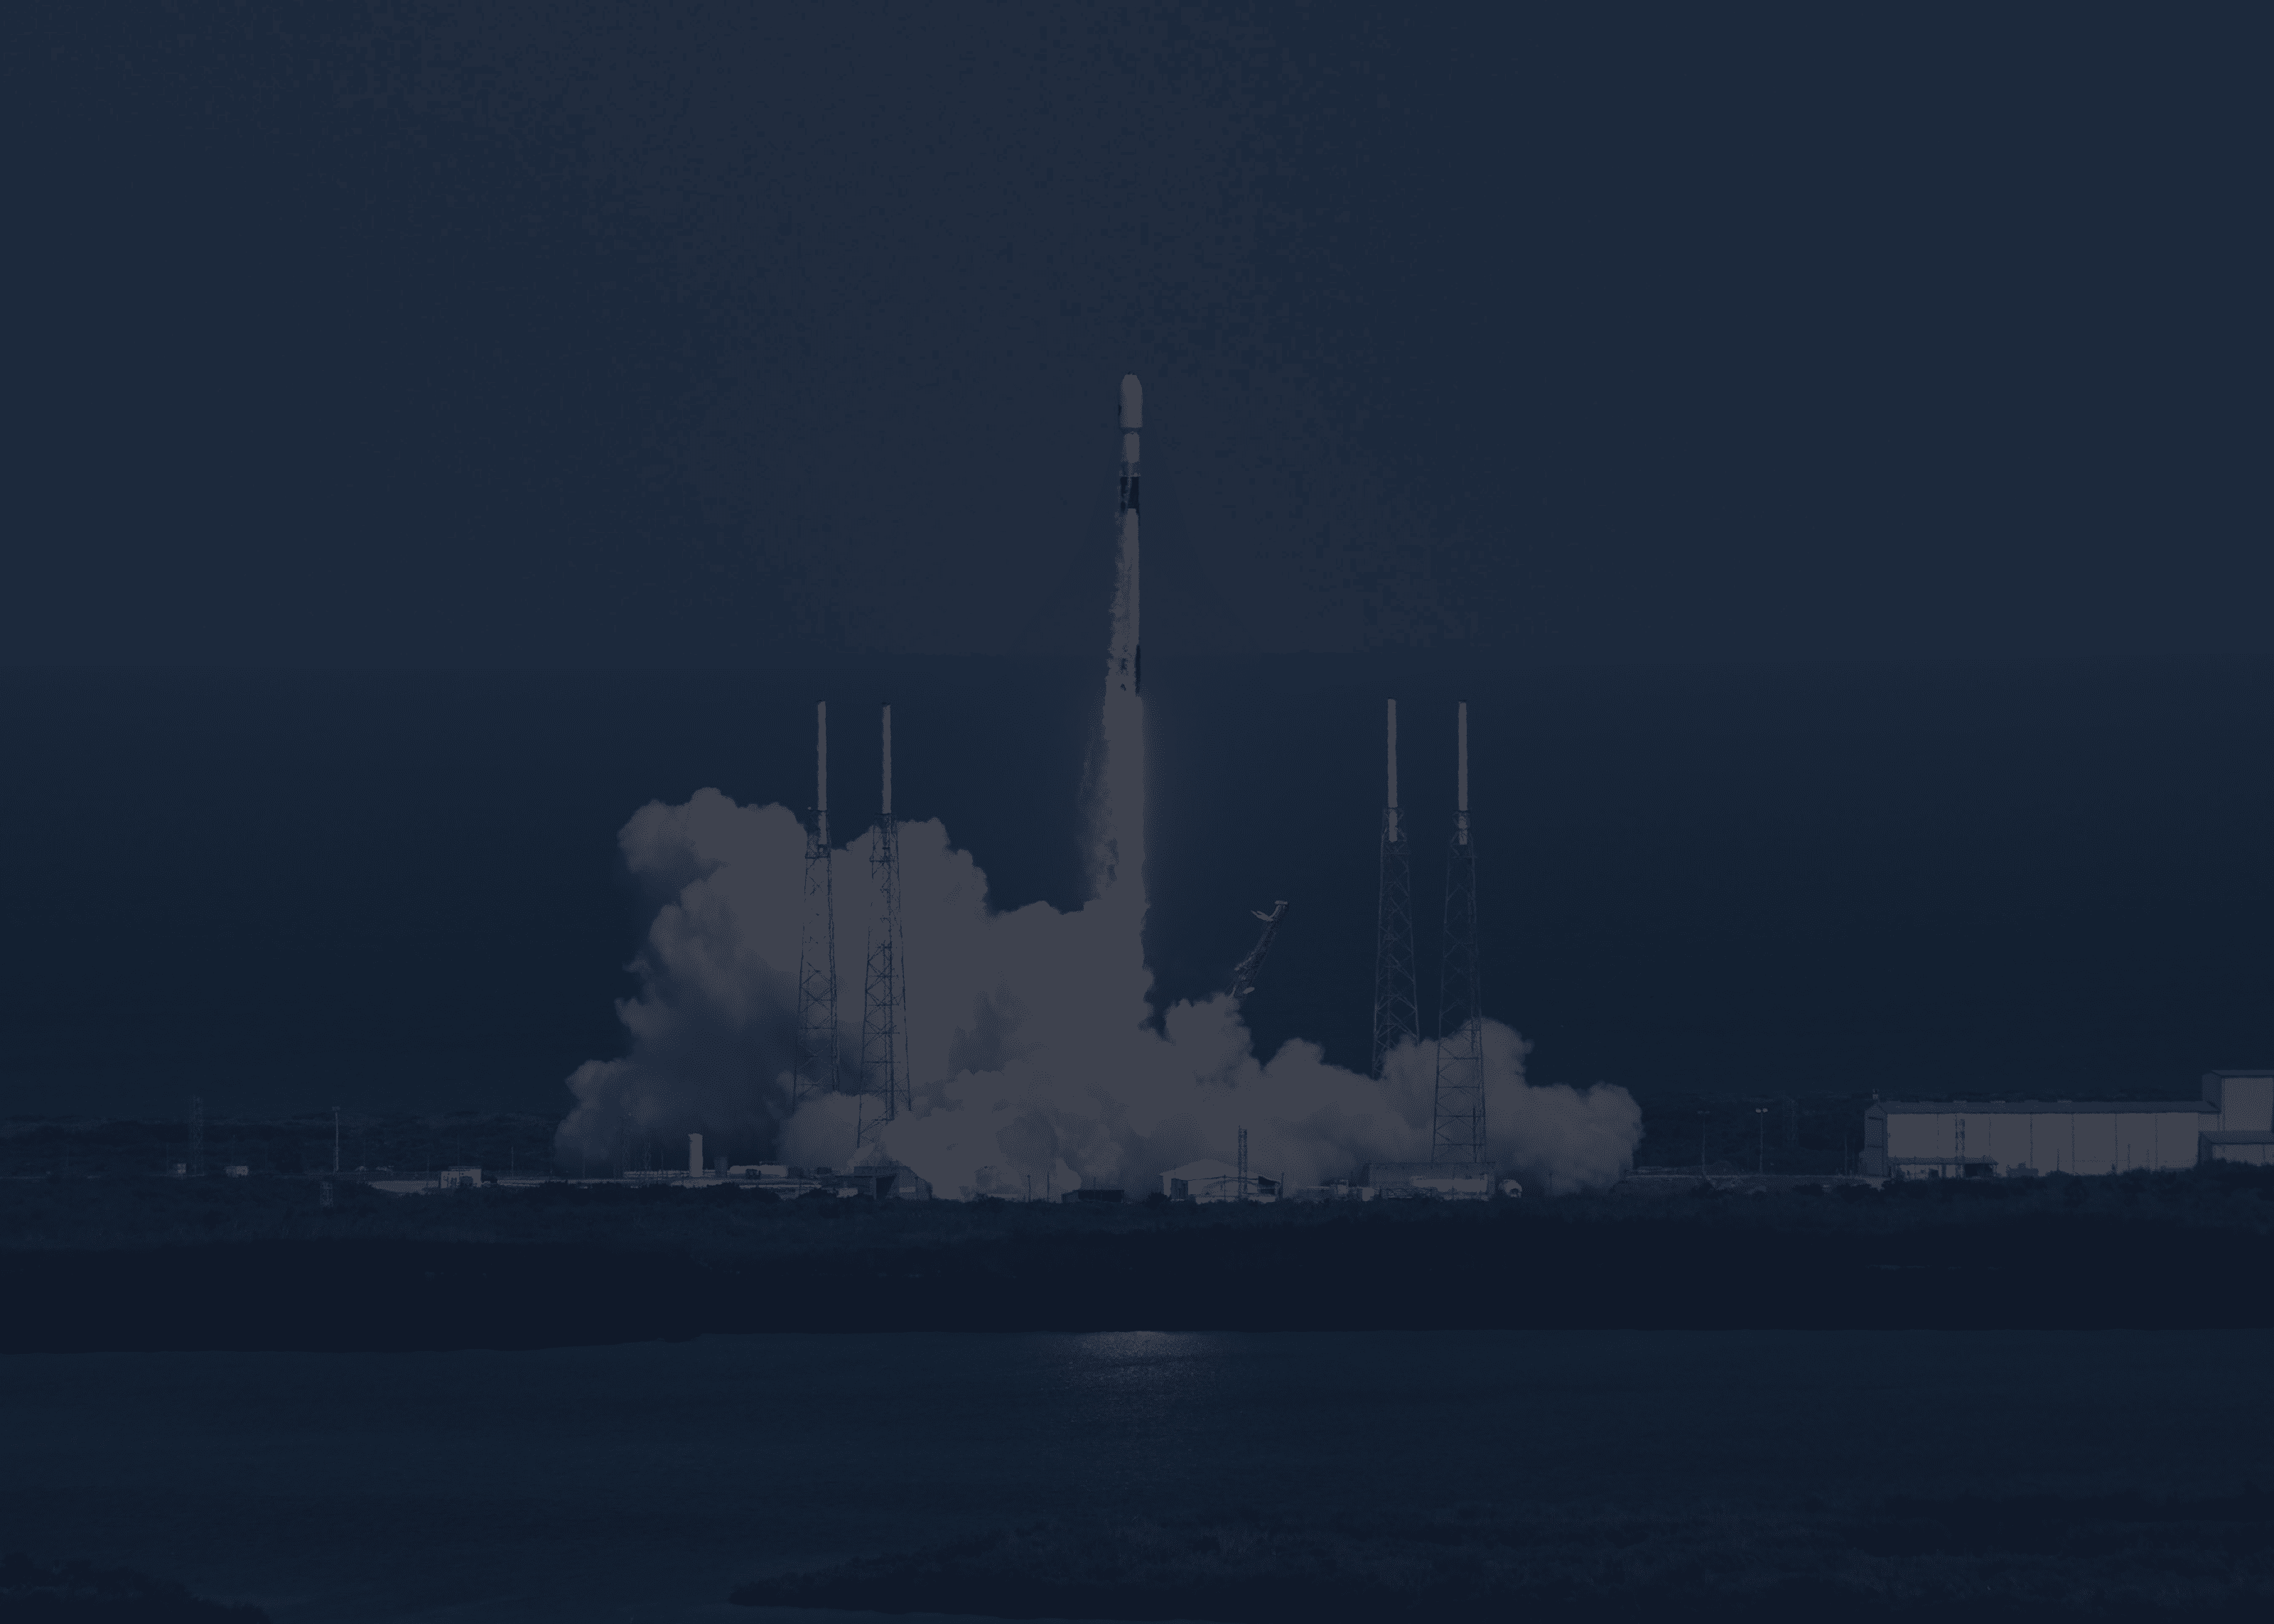 Rocket taking off from launchpad